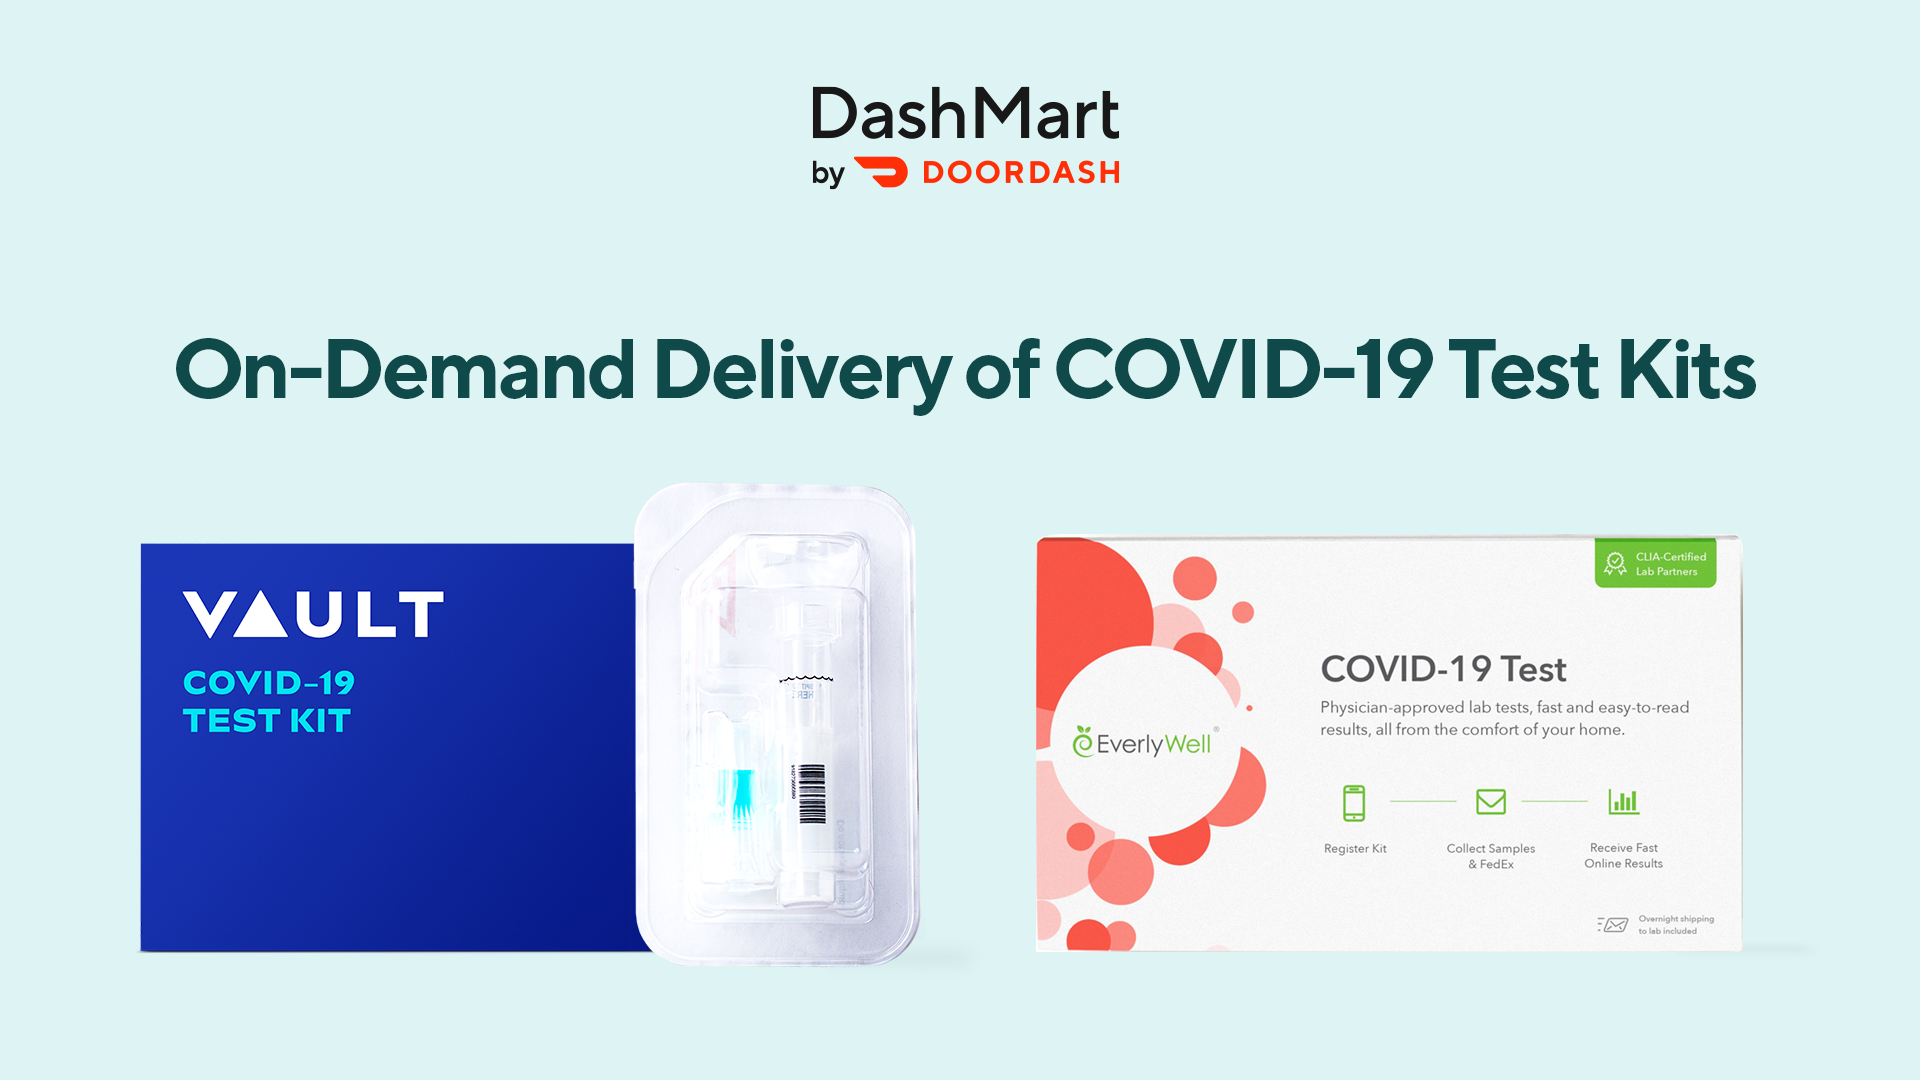 DOORDASH deactived me during this COVID19